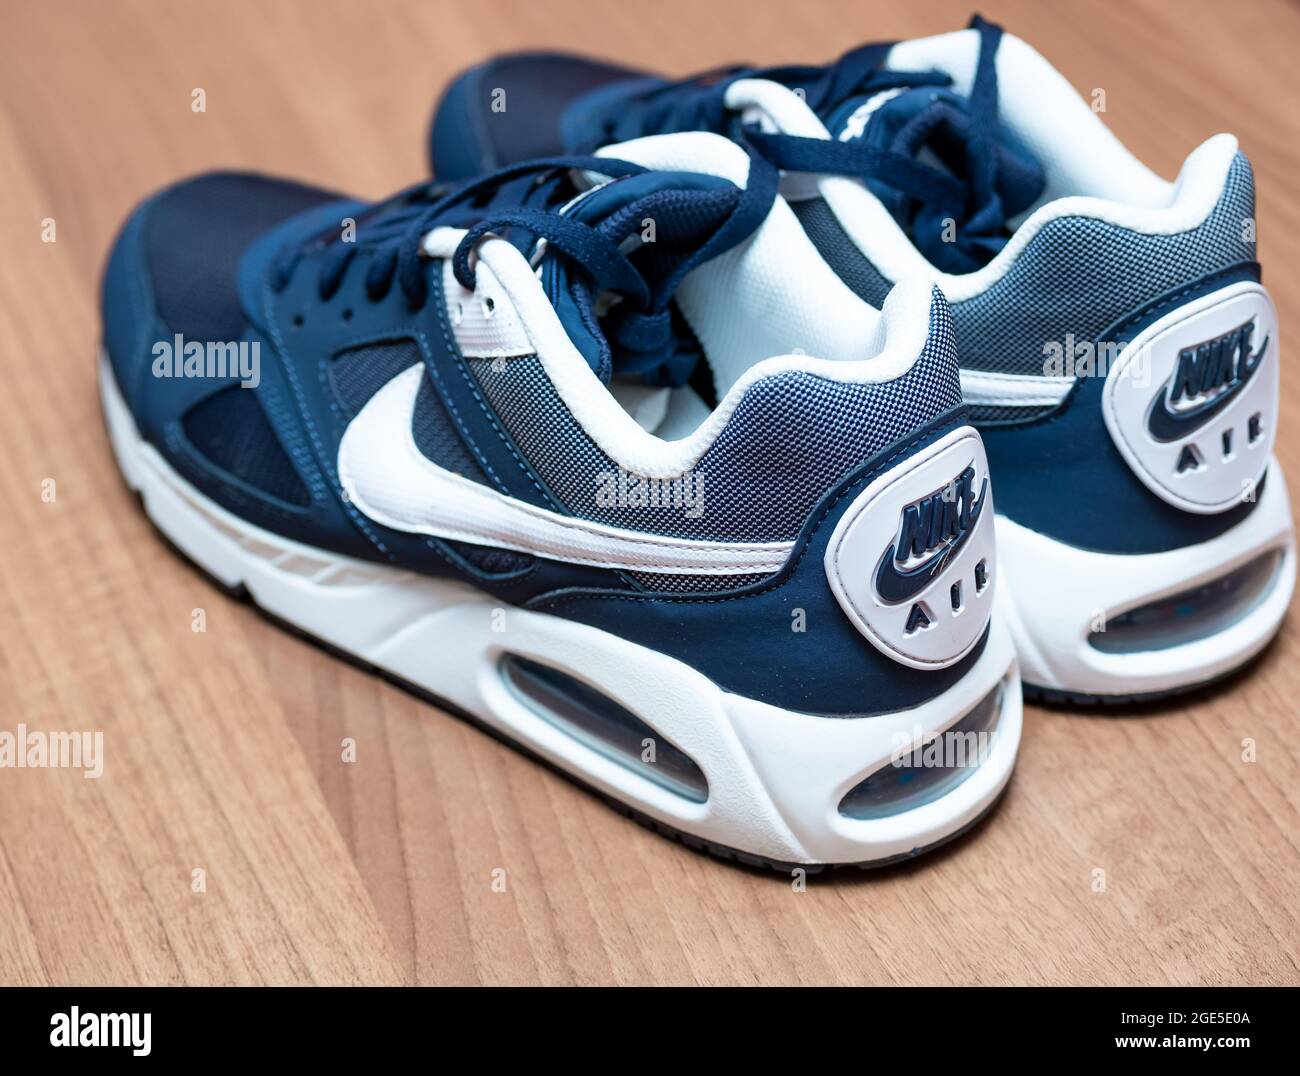 Norwich, Norfolk, UK – August 16 2021. Close and selective focus on navy blue  Nike Air Max trainers or sneakers for men Stock Photo - Alamy